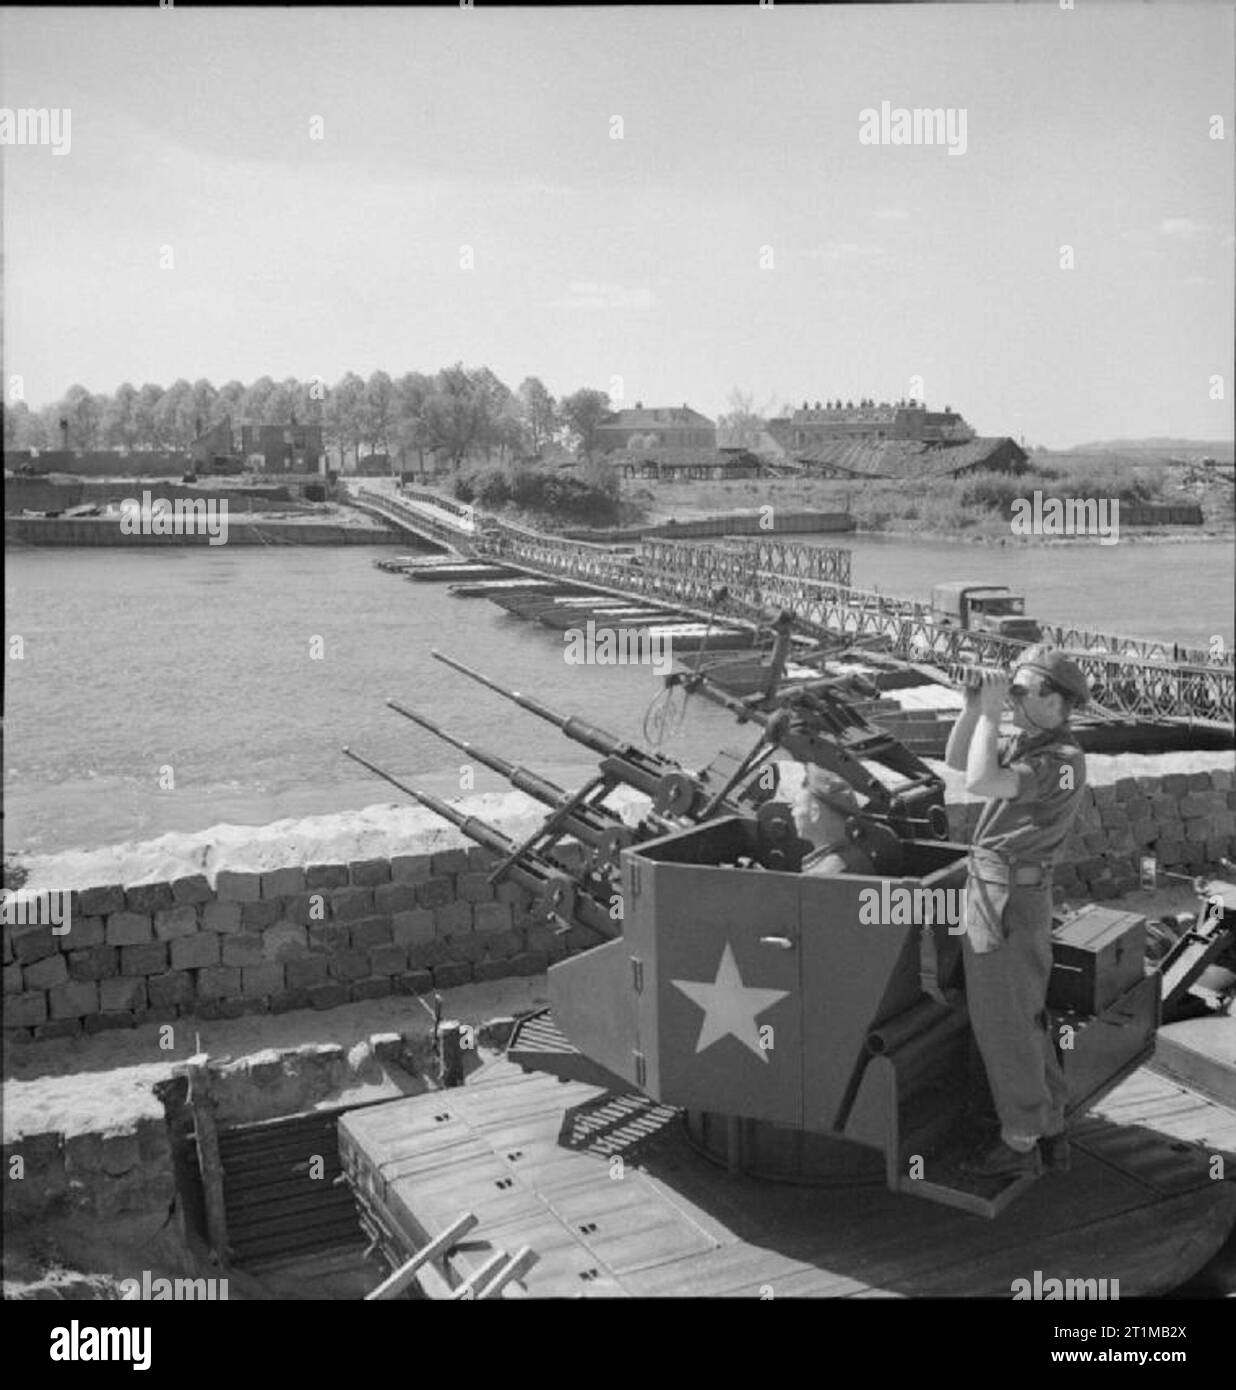 The British Army in North-west Europe 1944-45 A British triple 20mm anti-aircraft gun position guards the Bailey Bridge at Arnhem, 18 April 1945. Stock Photo